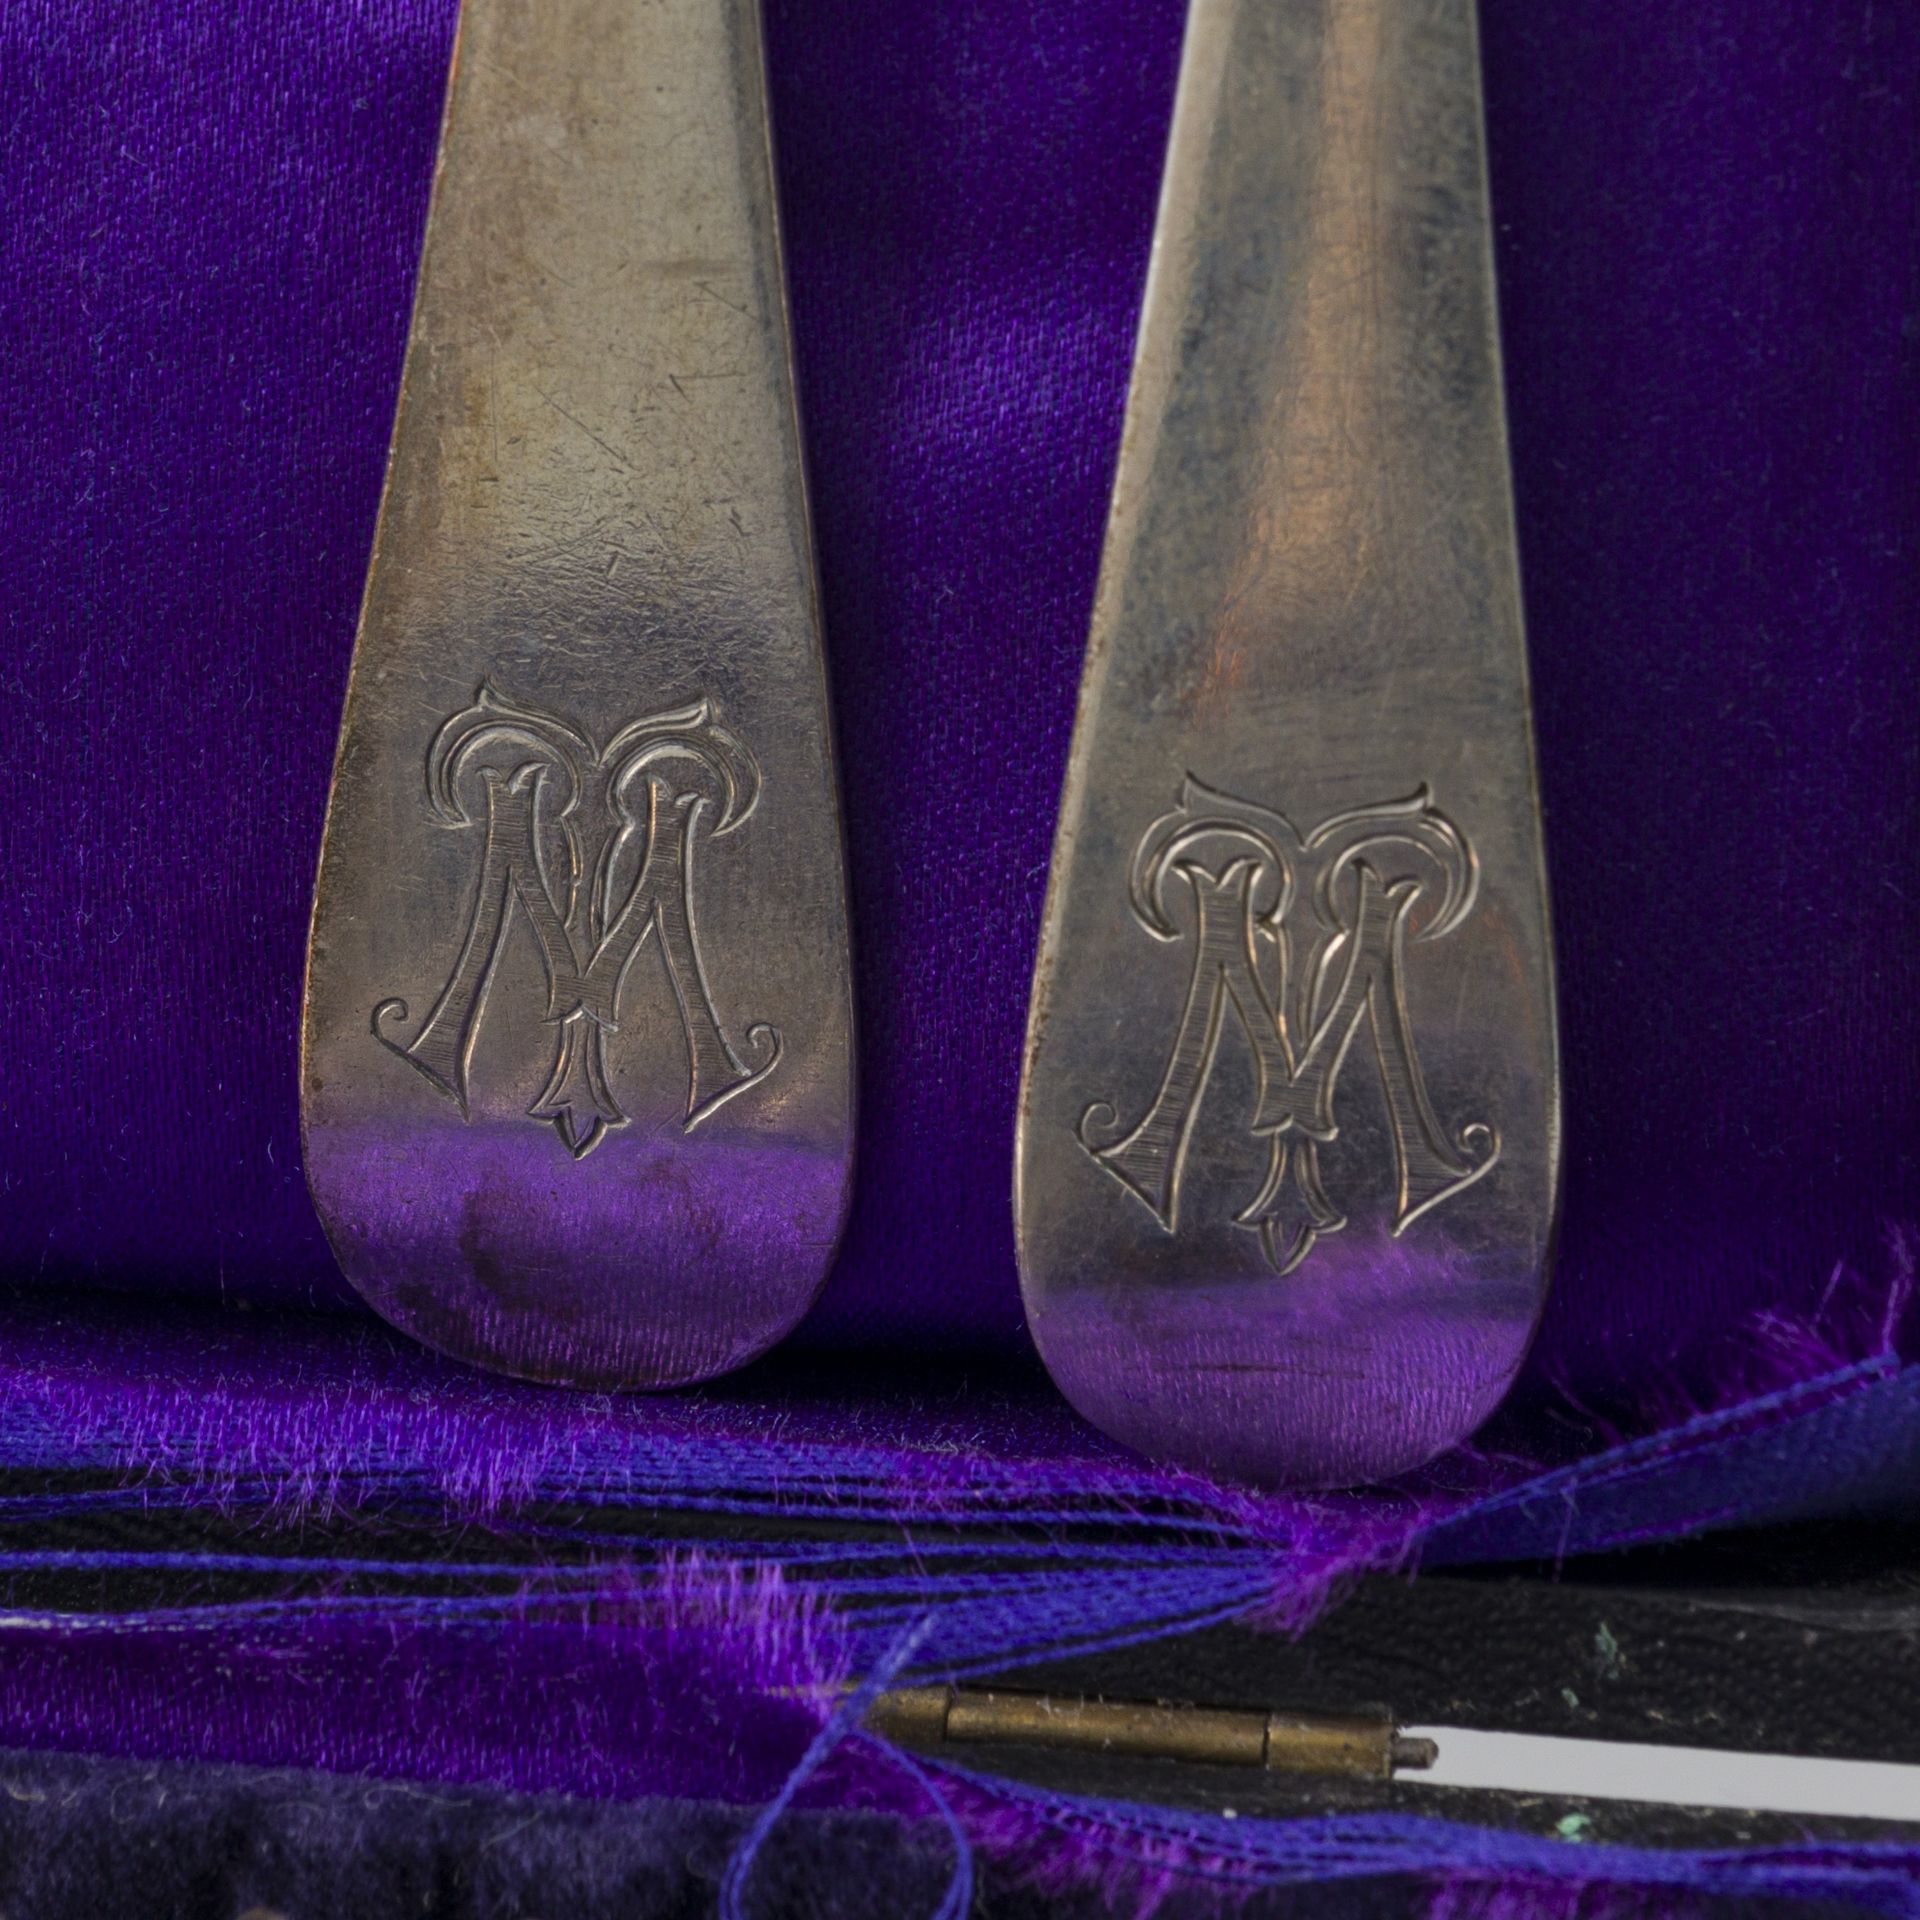 24-piece set of spoons & forks "Haags Lofje" silver. - Image 3 of 3